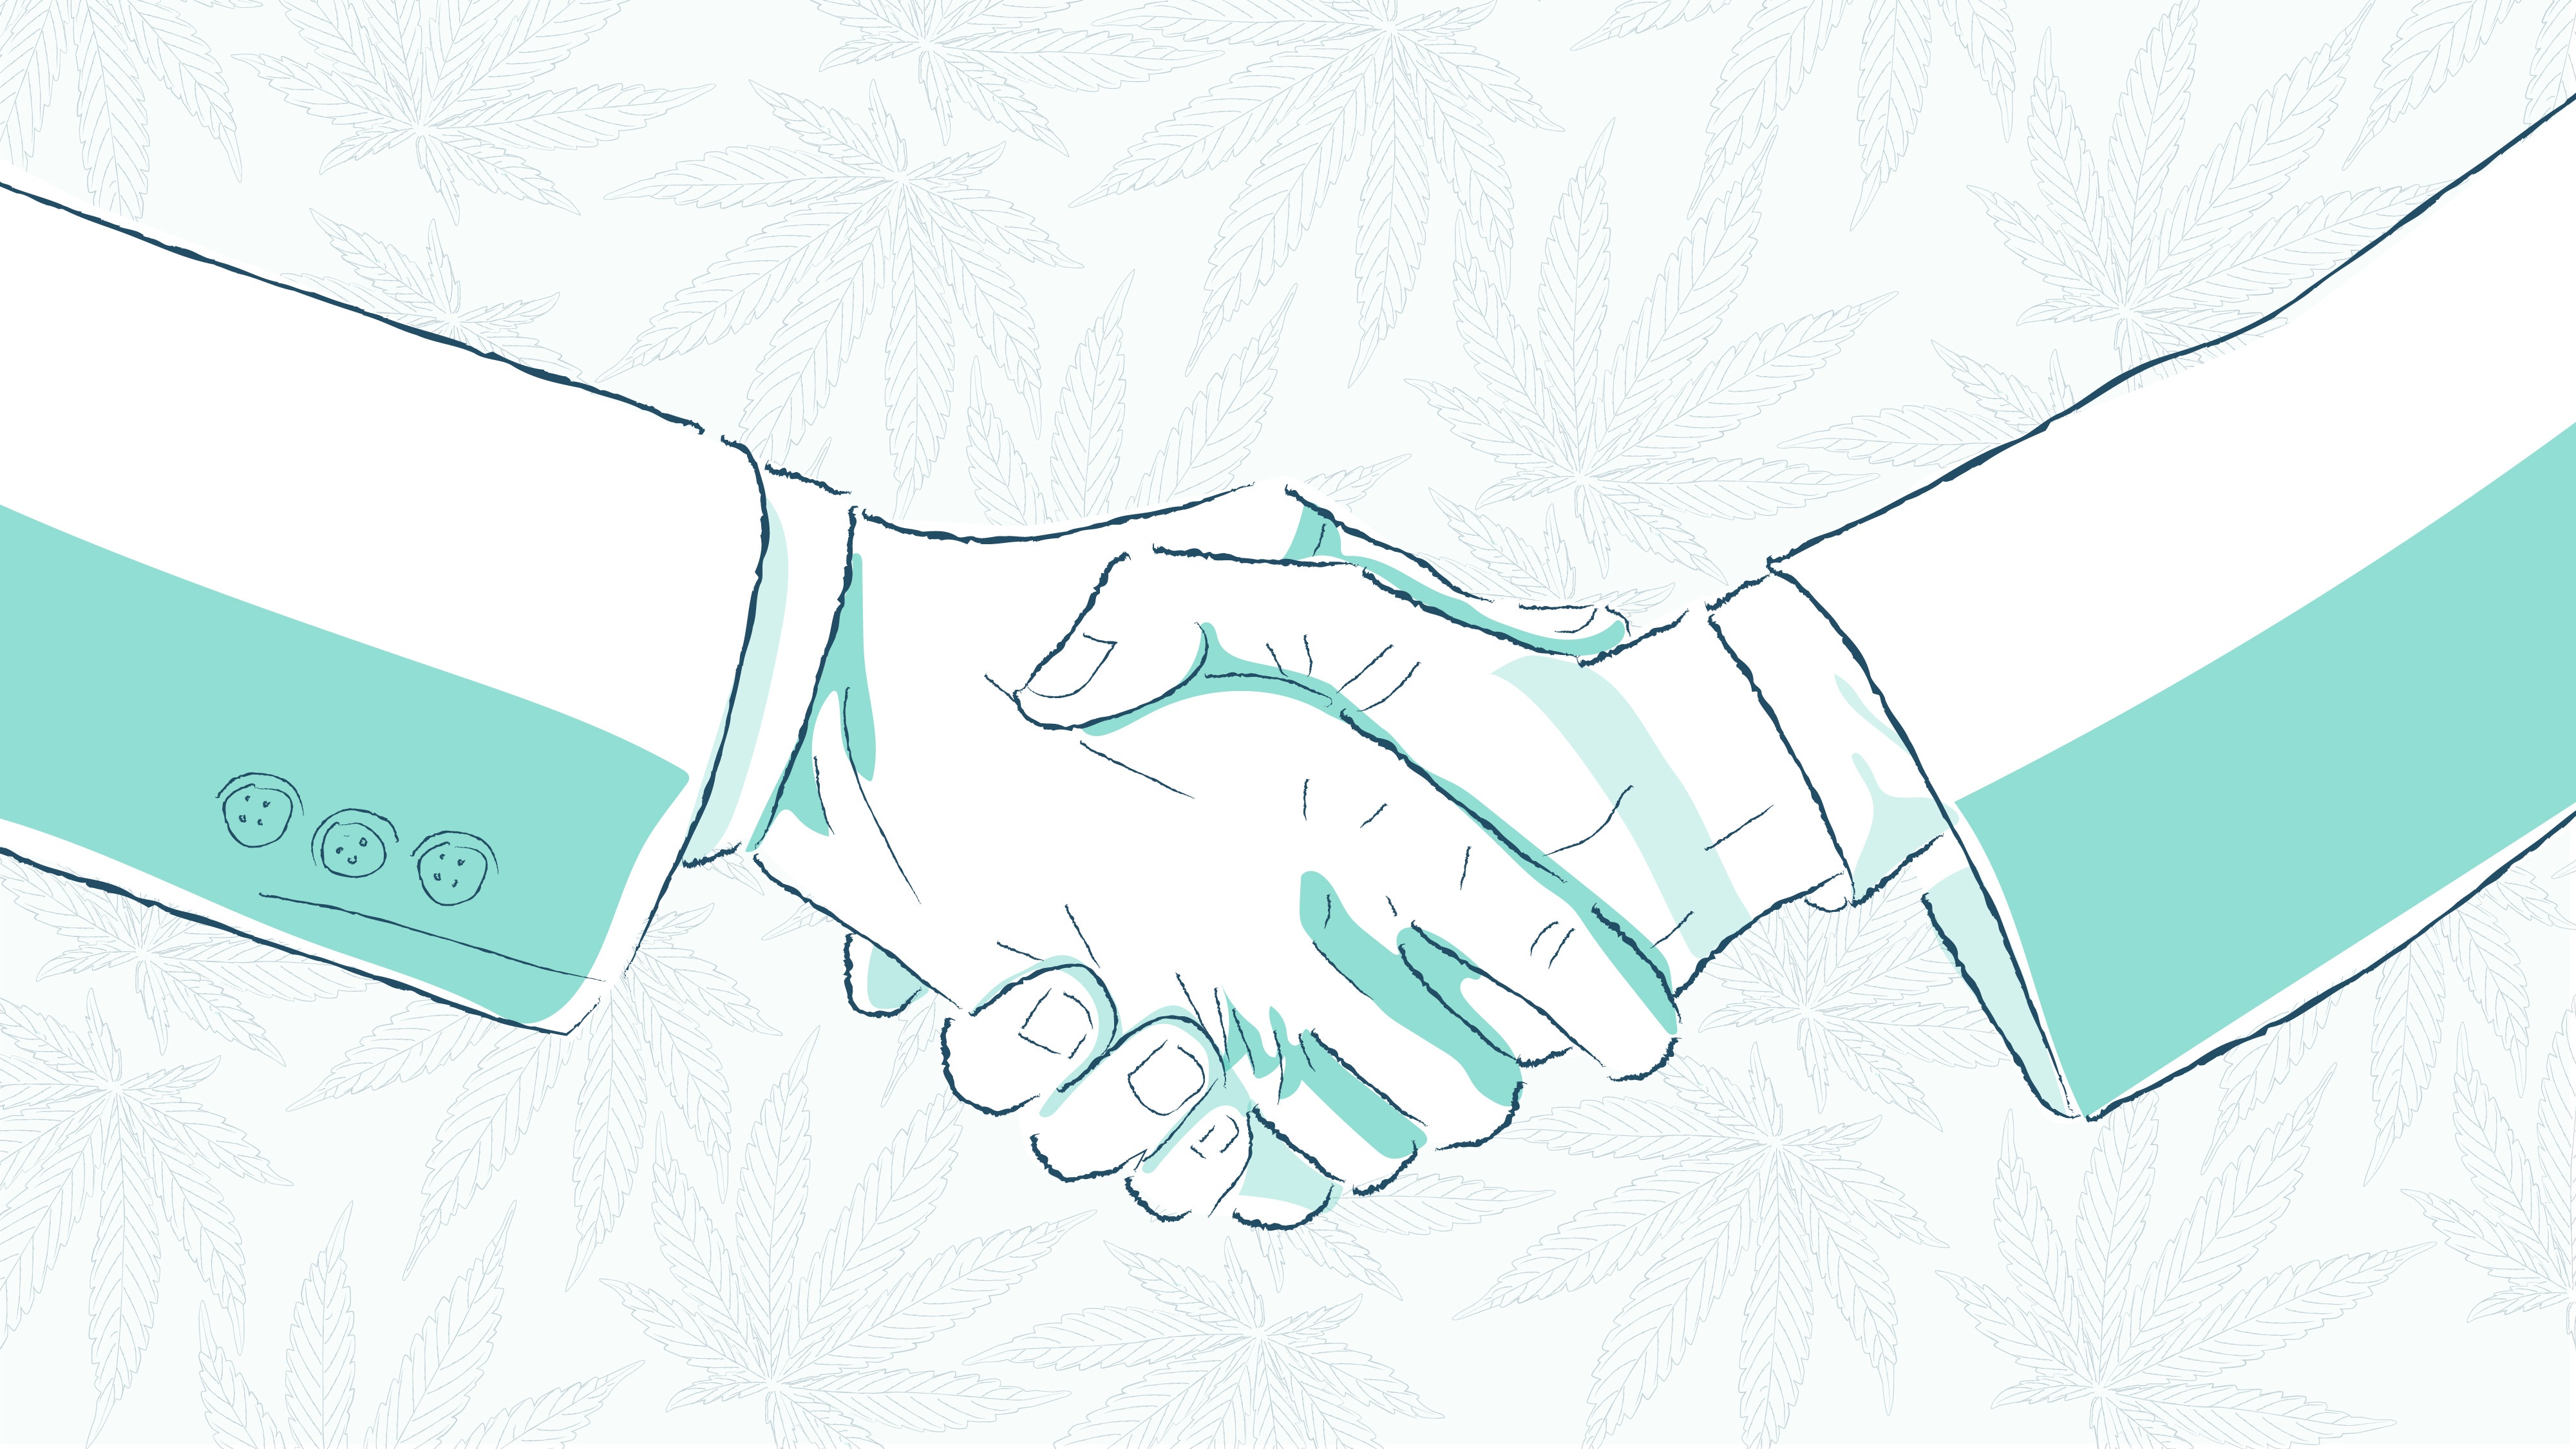 Akerna Acquires 365 Cannabis For $17M, Seeks To Create Most Comprehensive ERP System In Cannabis Industry